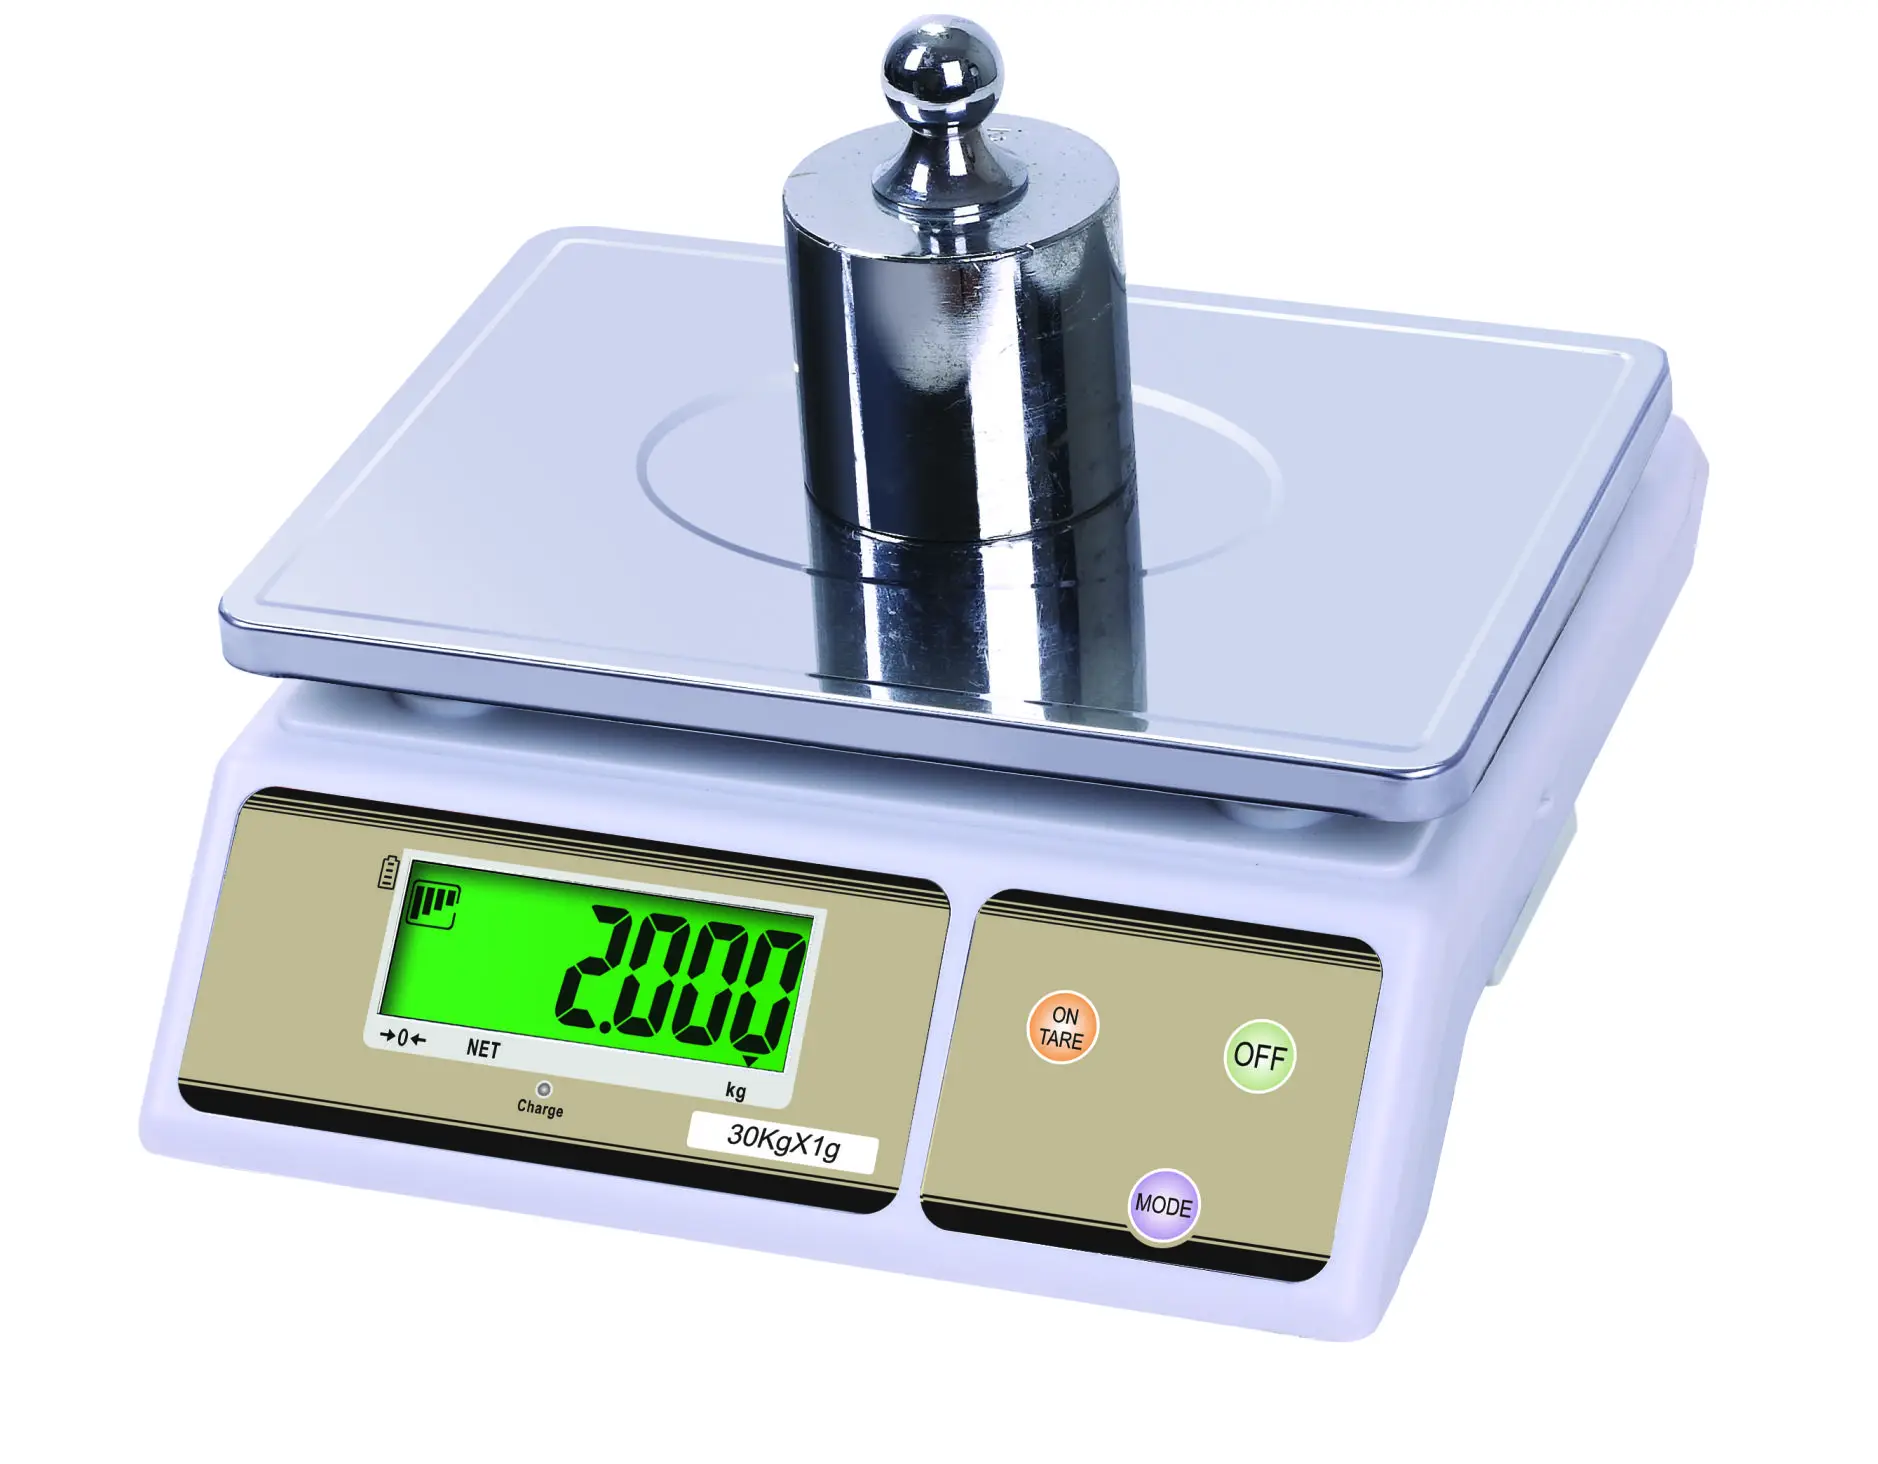 

Digital Weighing Scale kitchen scale 3Kg 6Kg 15Kg 30kgFood Scales Digital Weight Gram and Oz Scale with LCD/ Tare